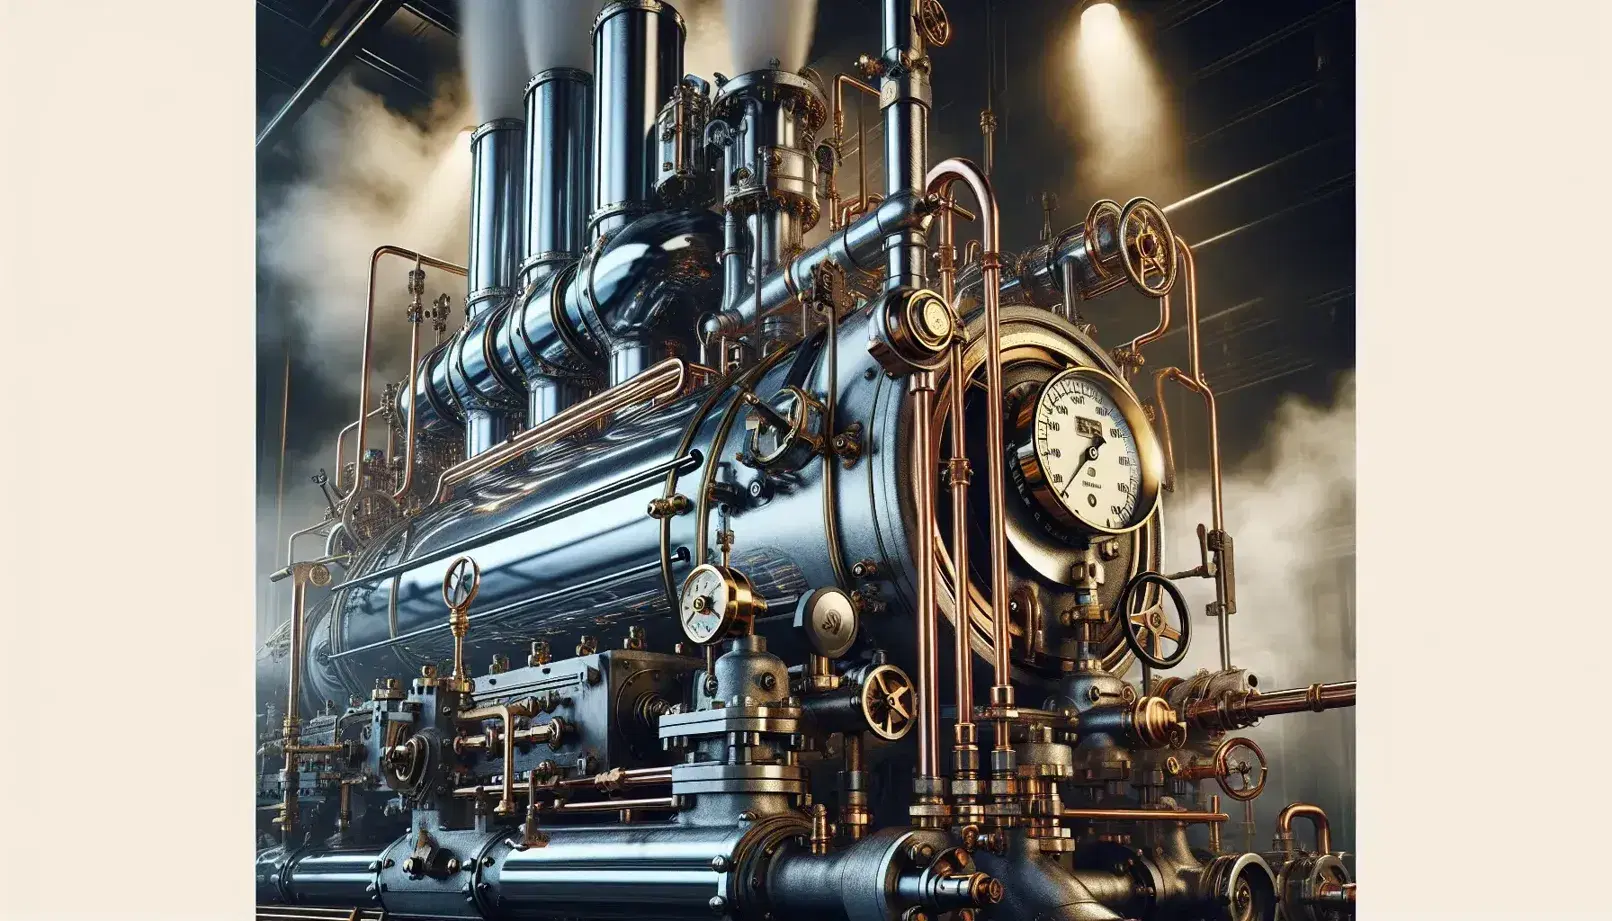 Running steam engine with shiny cylindrical boiler, metal valves and pipes, pressure gauge in the foreground and light steam in the background.